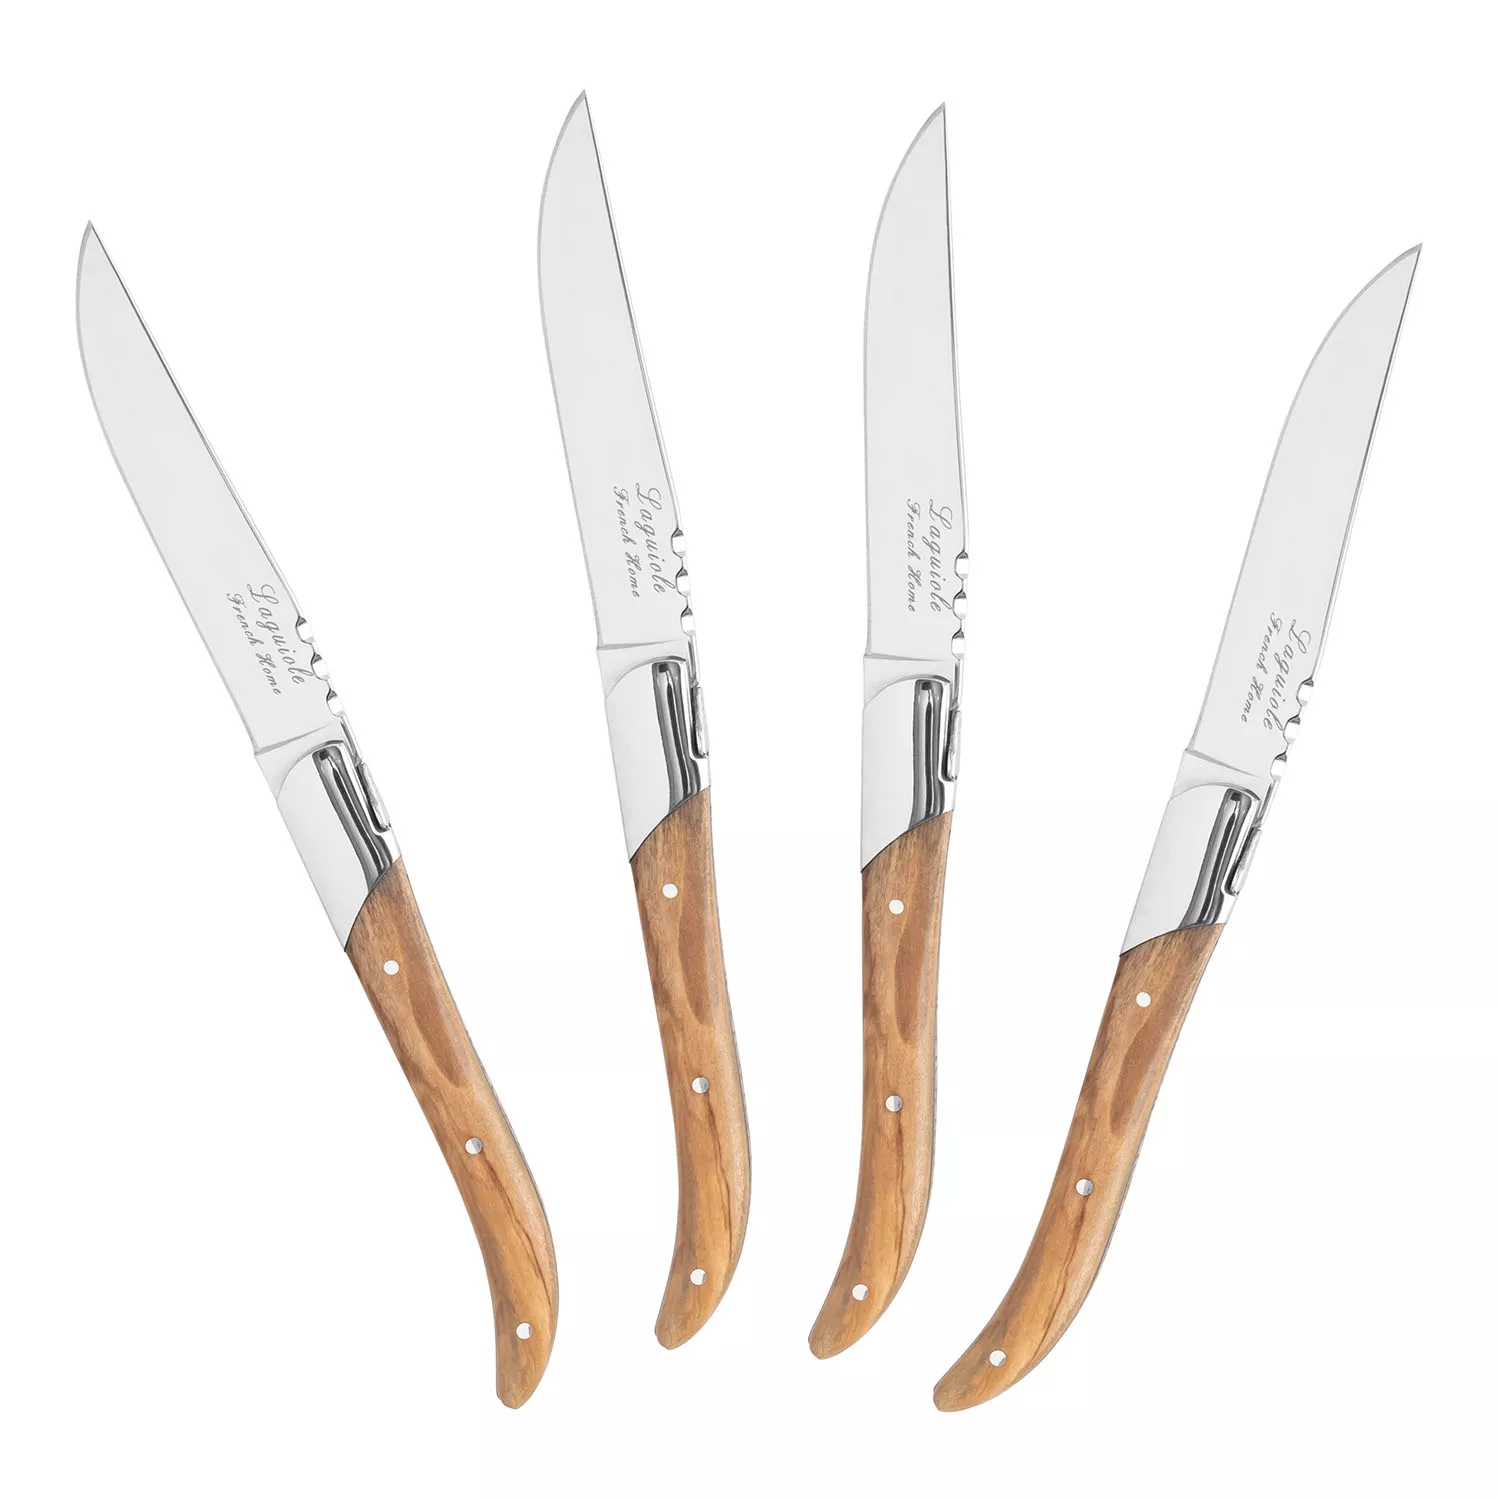 French Home Laguiole Connoisseur Steak Knives with Olivewood Handles, Set of 4 